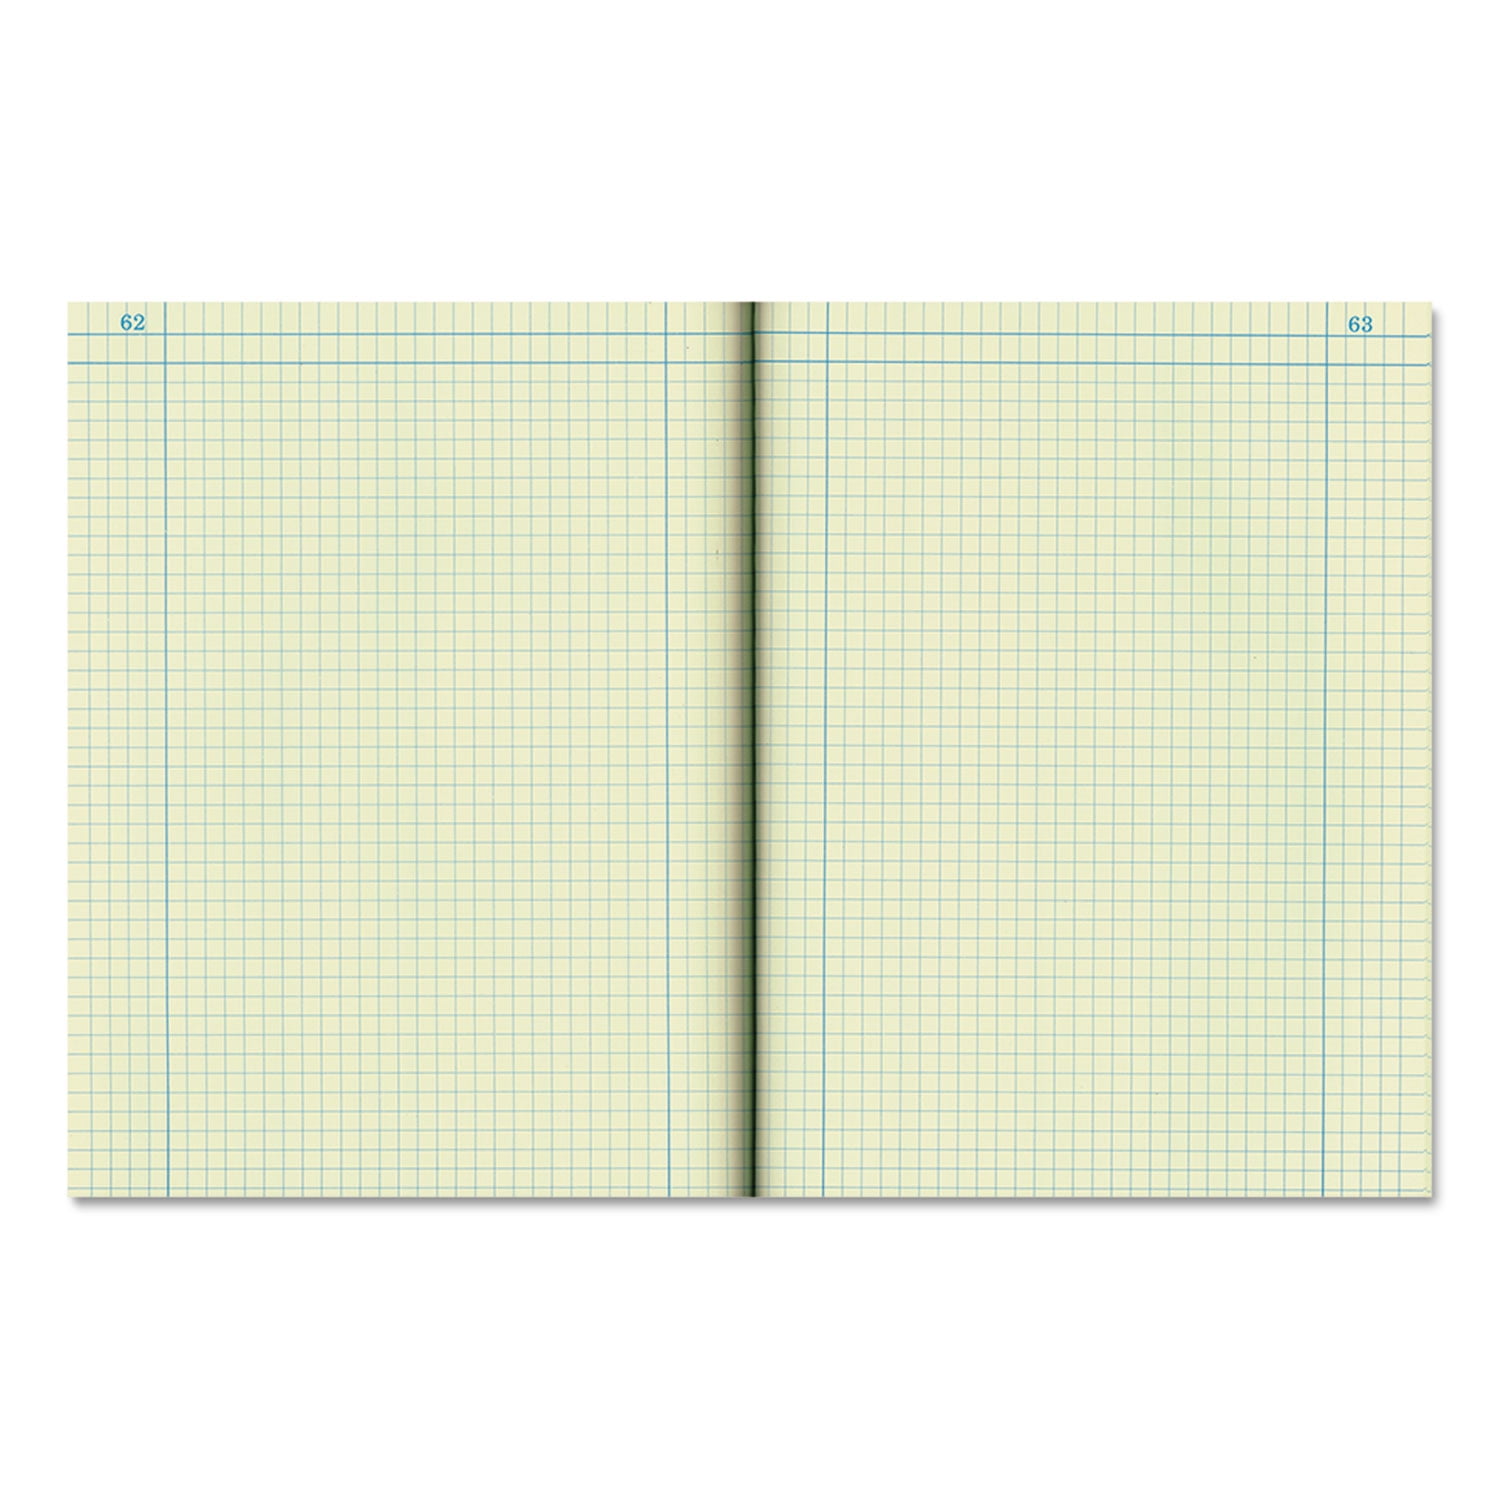 Green Paper 4 X 4 Quad 43648 75 Sheets 11.75 x 9.25 Inches Brown National Brand Computation Notebook 